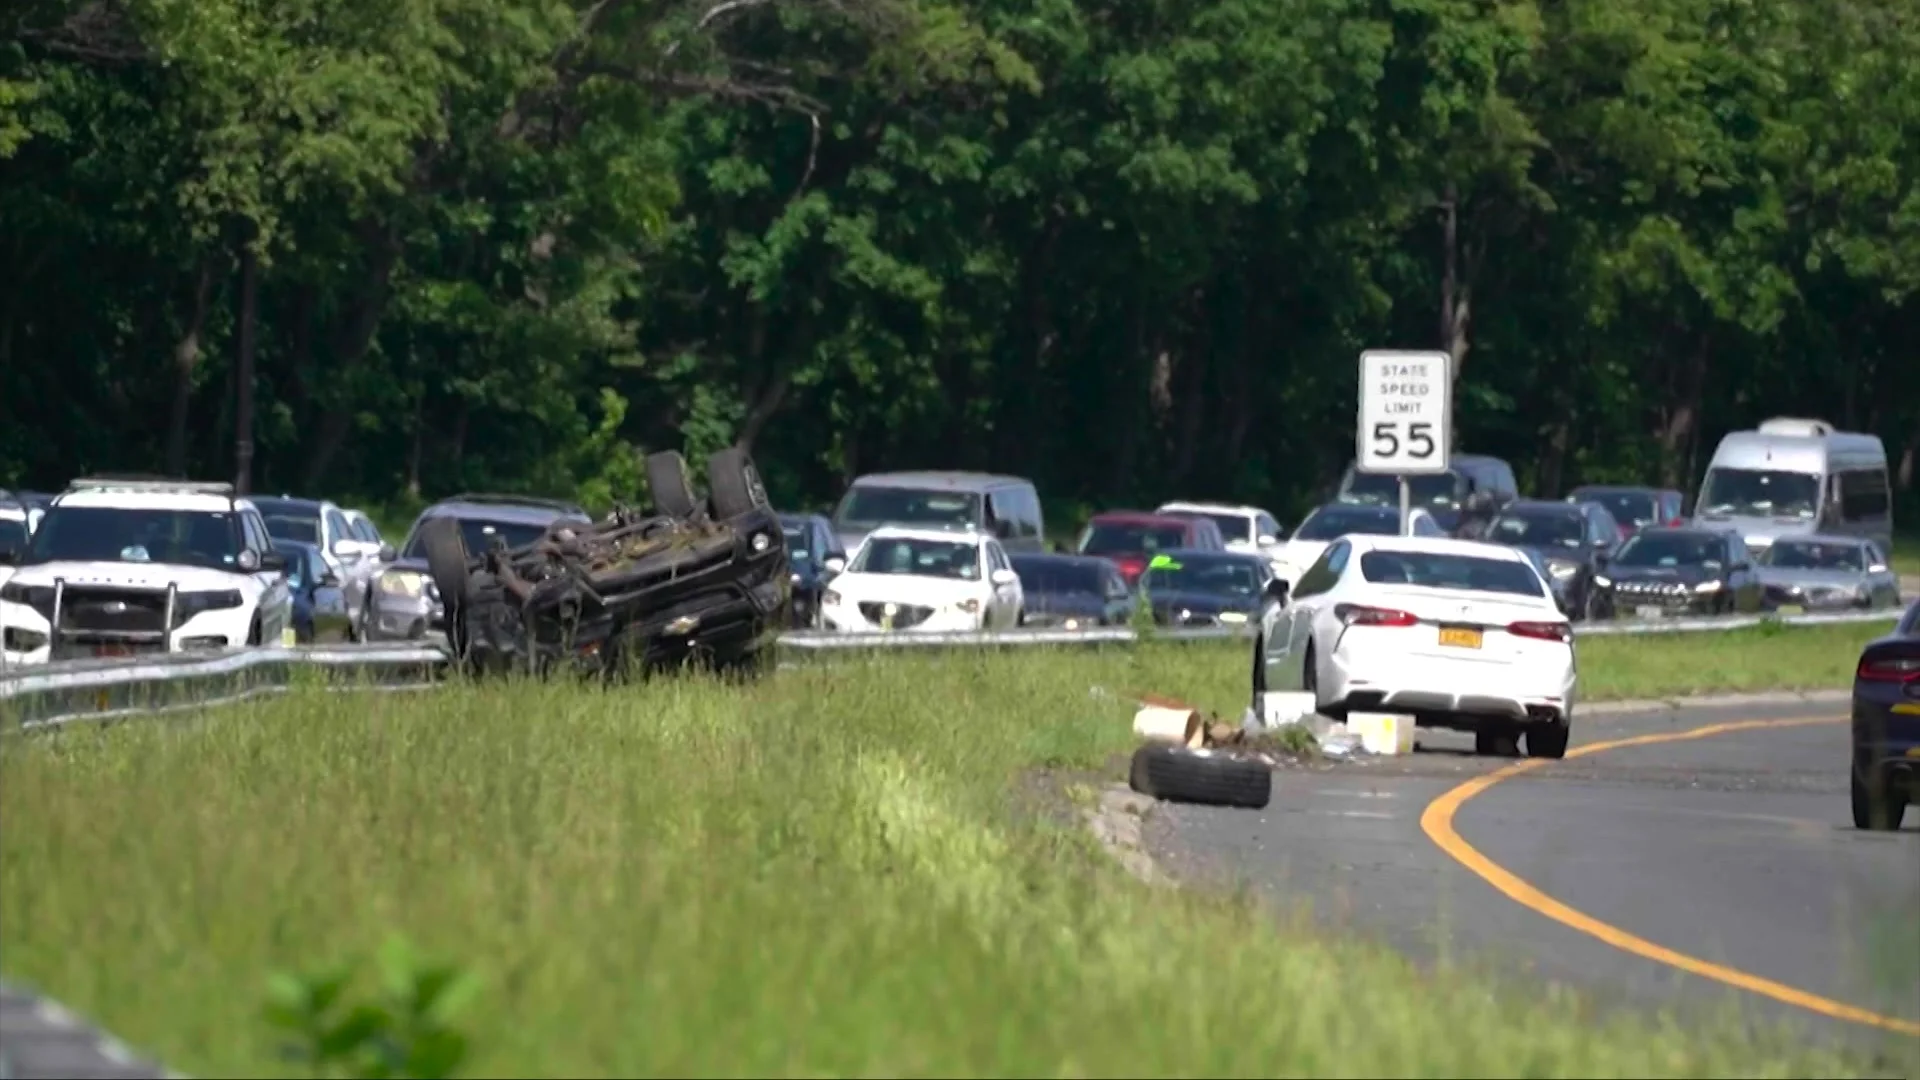 Police: Man killed in Southern State Parkway crash in North Massapequa – News 12 Long Island